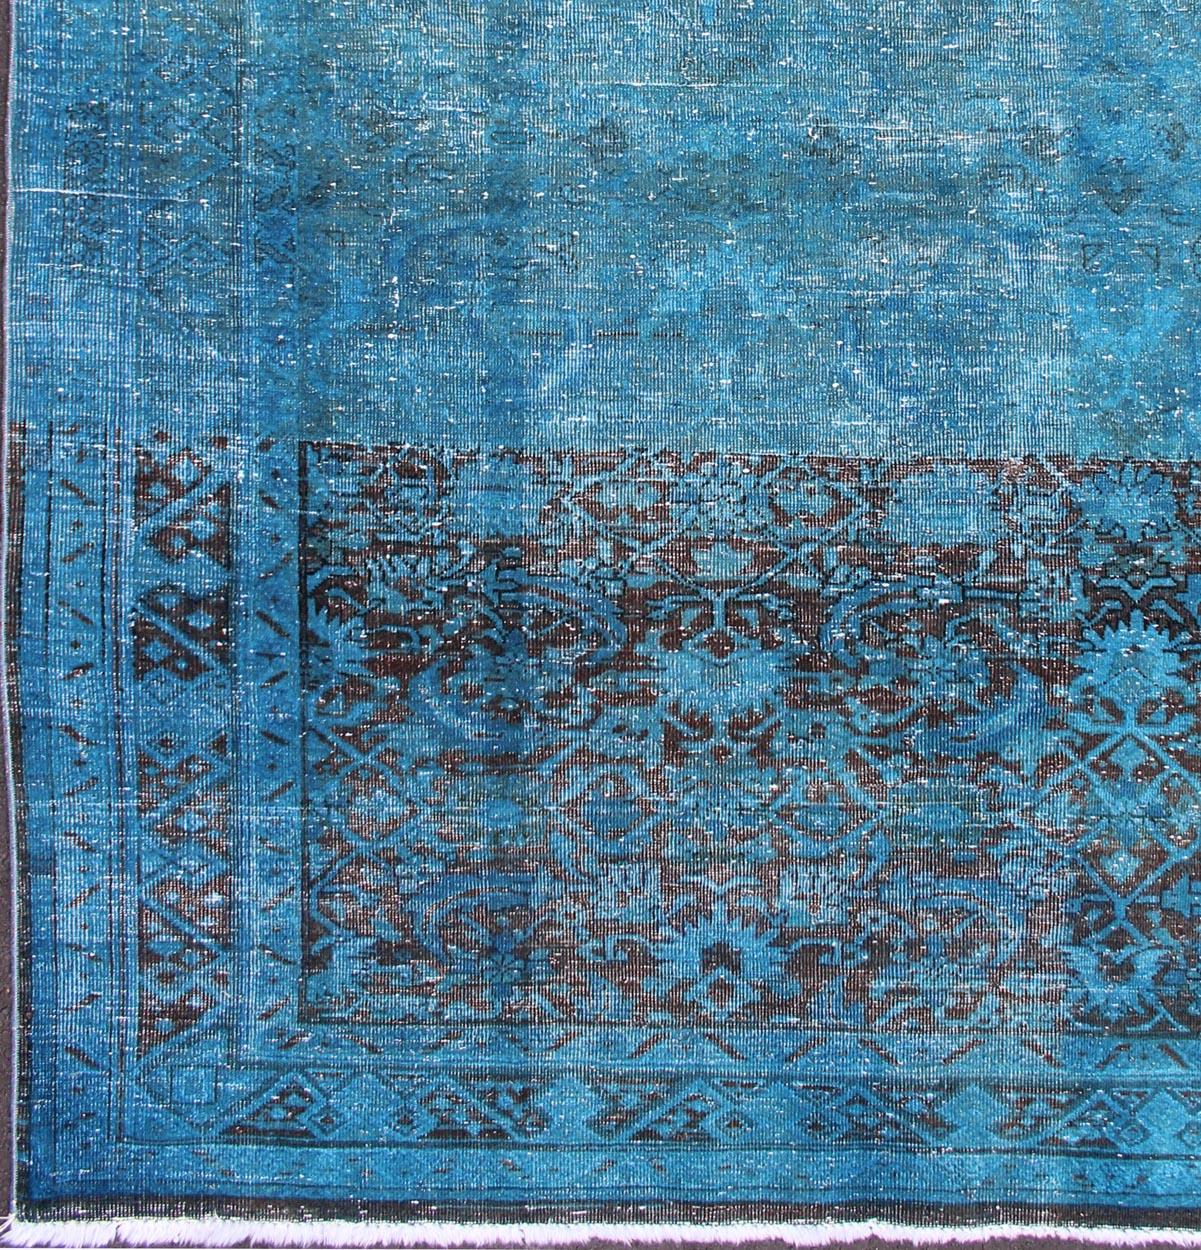 This beautiful antique Malayer rug from Iran was handwoven and bears a remarkably unique all-over design rendered in tones of blue. The combination of its early period creation and its one-of-a-kind design makes this a rare and desirable